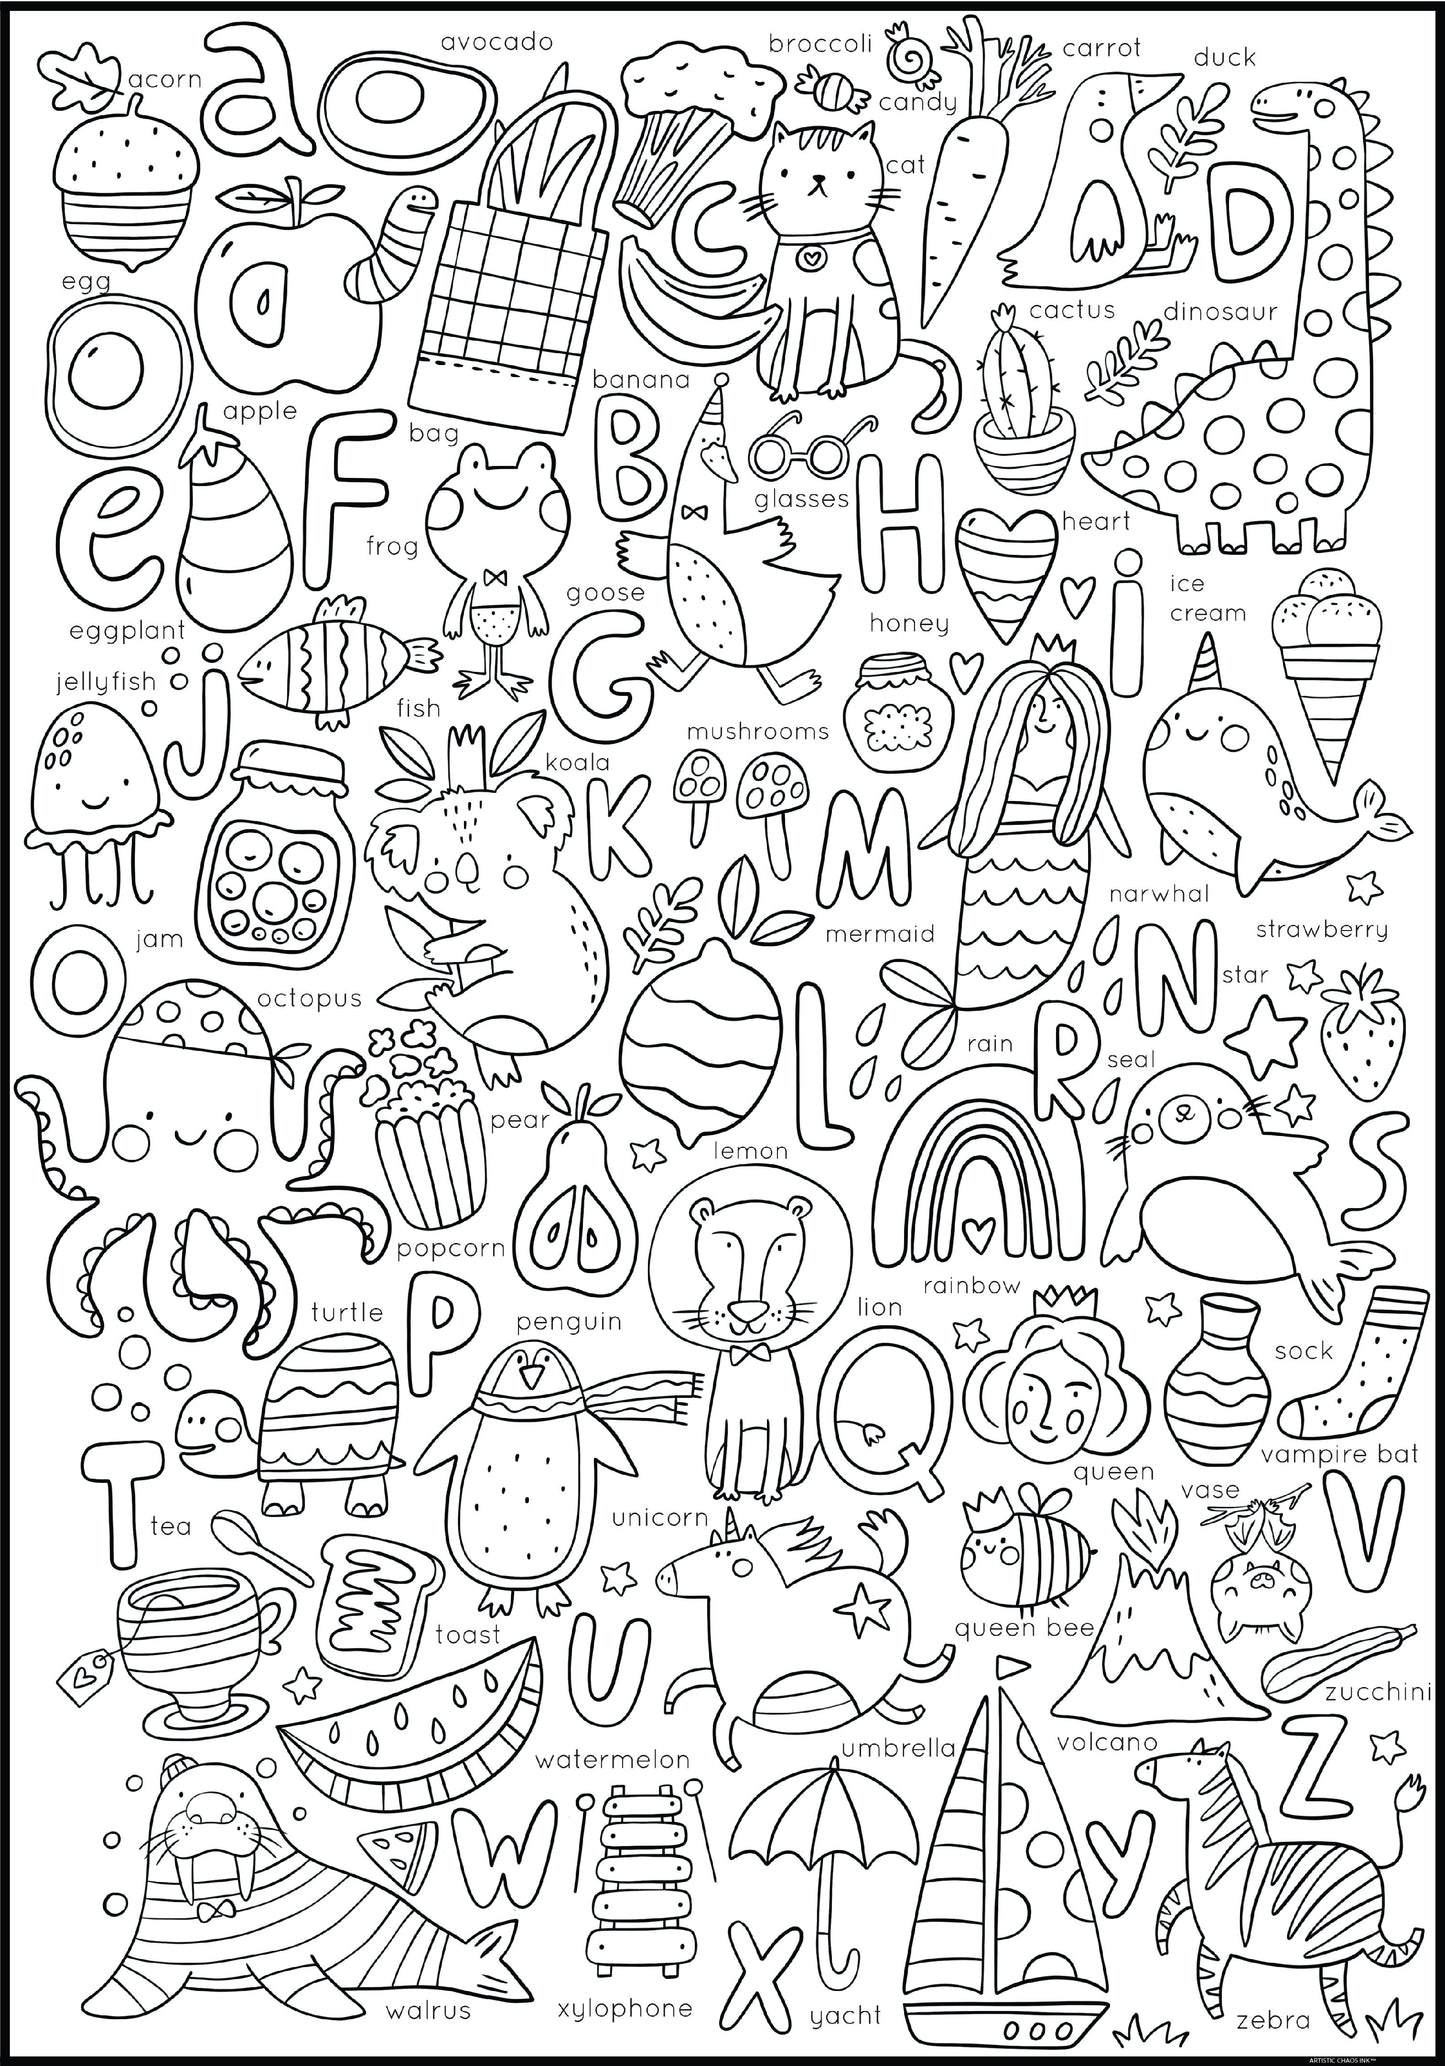 ABC's Giant Coloring Poster